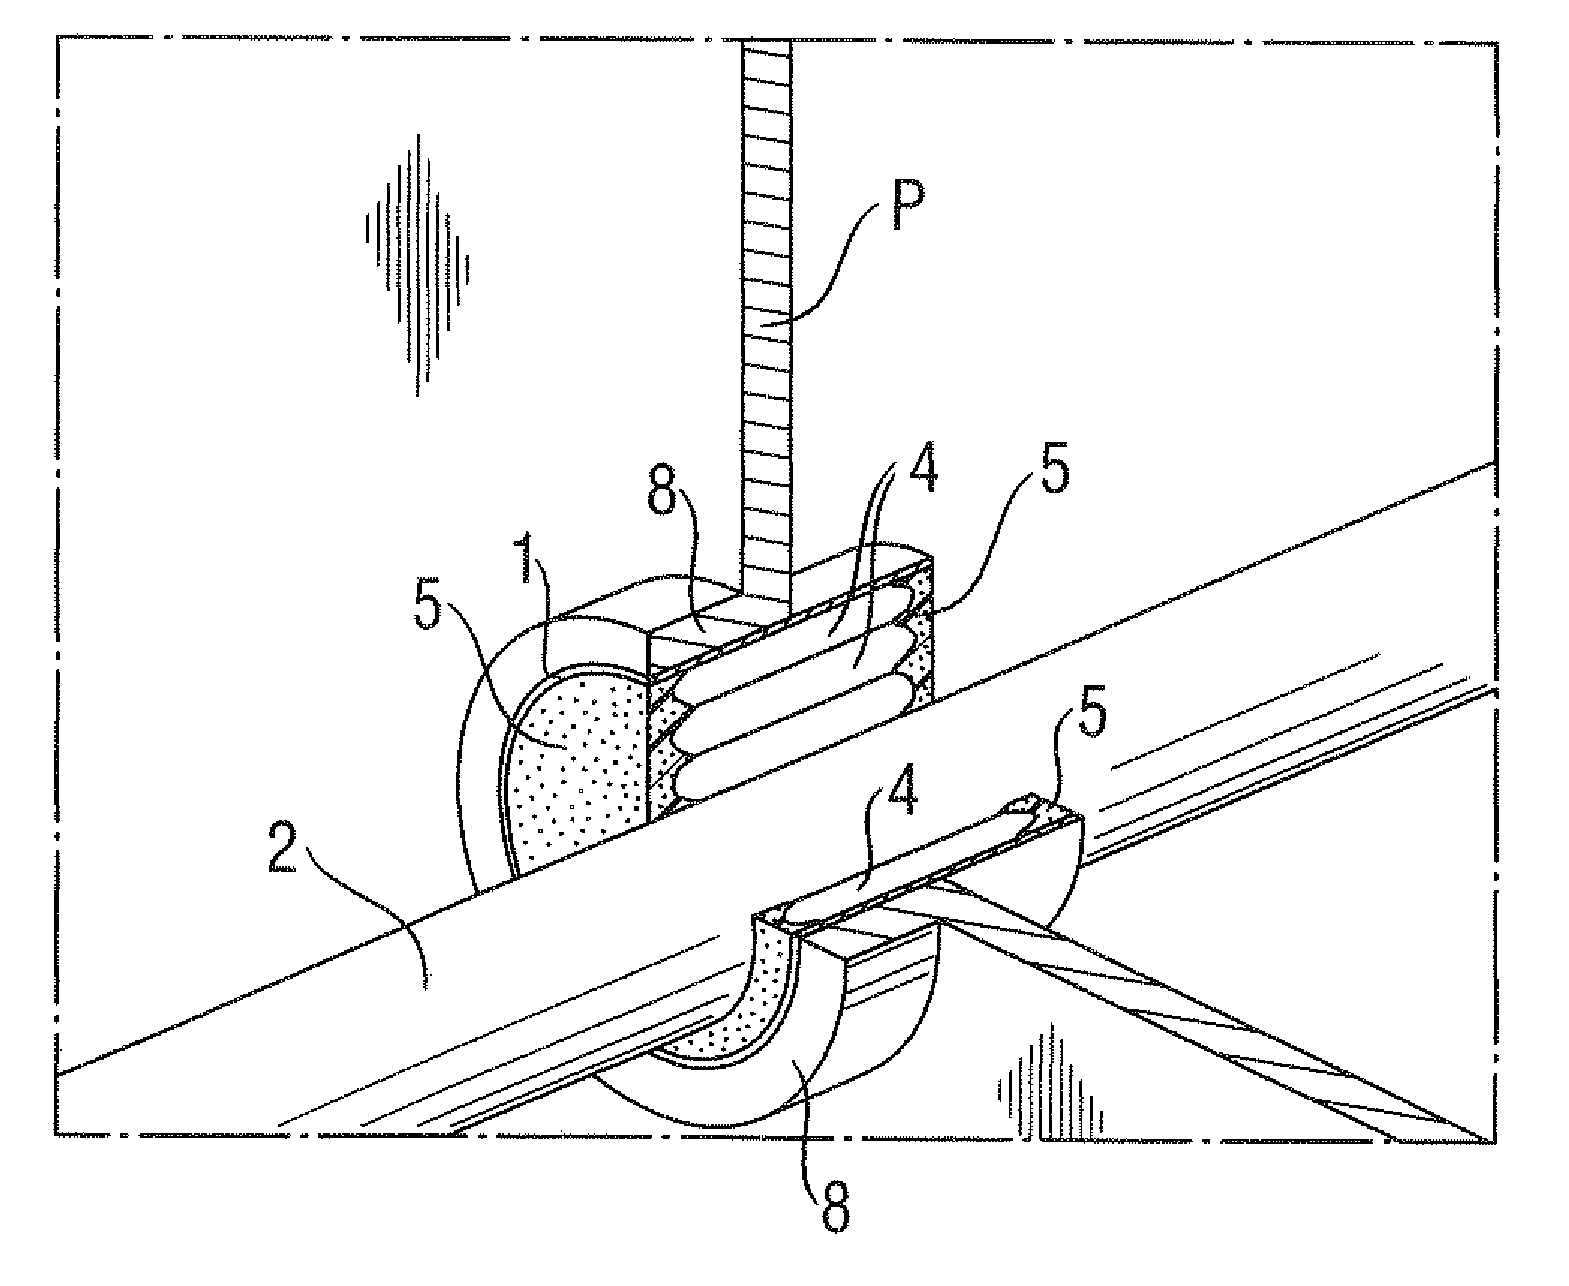 System and method for sealing in a conduit a space between an inner wall of the conduit and at least one pipe or cable extending through the conduit